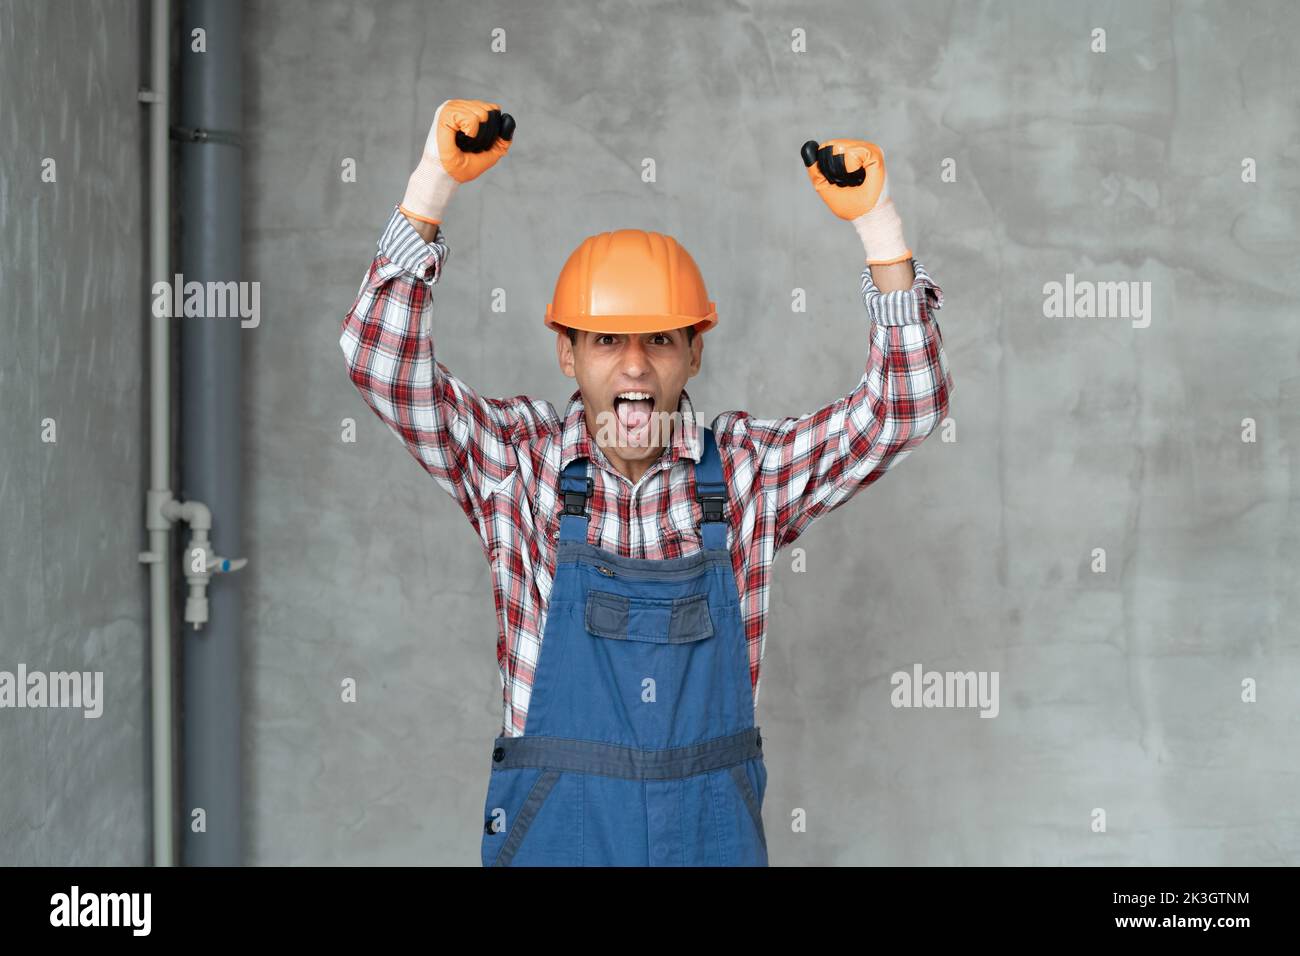 Angry builder man wearing construction uniform and safety helmet over gray wall background shouting and screaming with hands up. Communication and pro Stock Photo